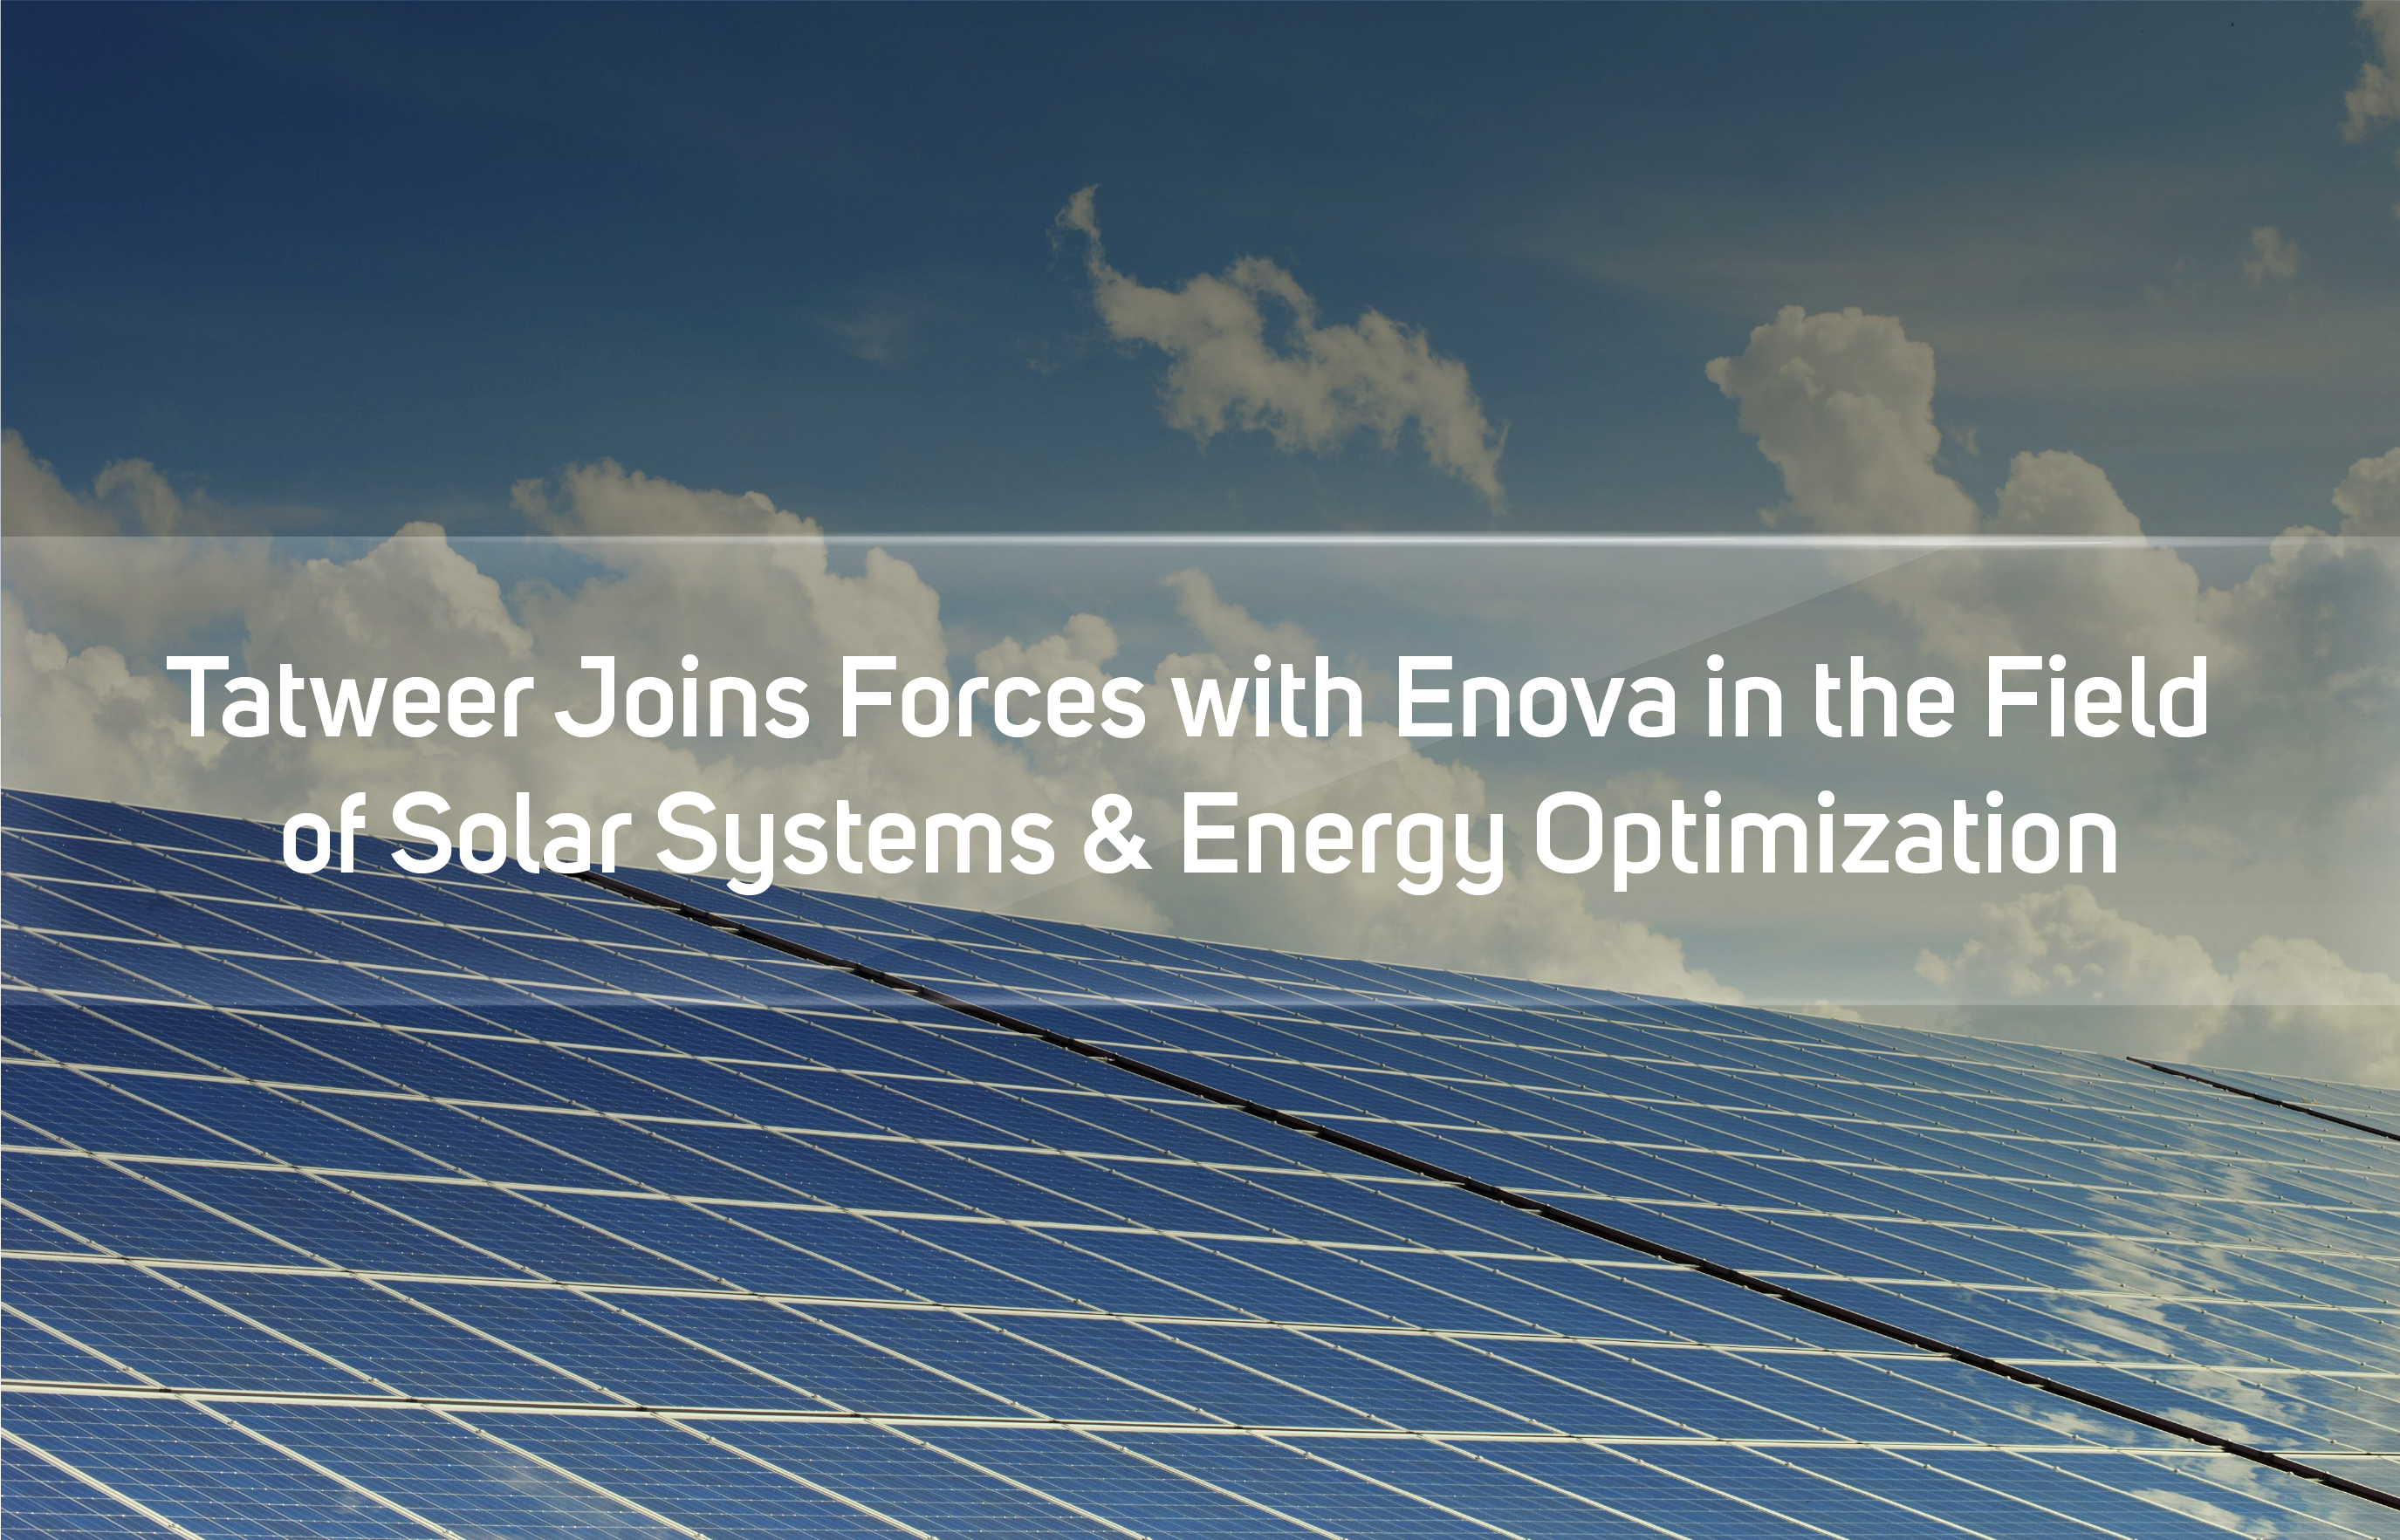 Tatweer Joins Forces with Enova in the Field of Solar Systems & Energy Optimization